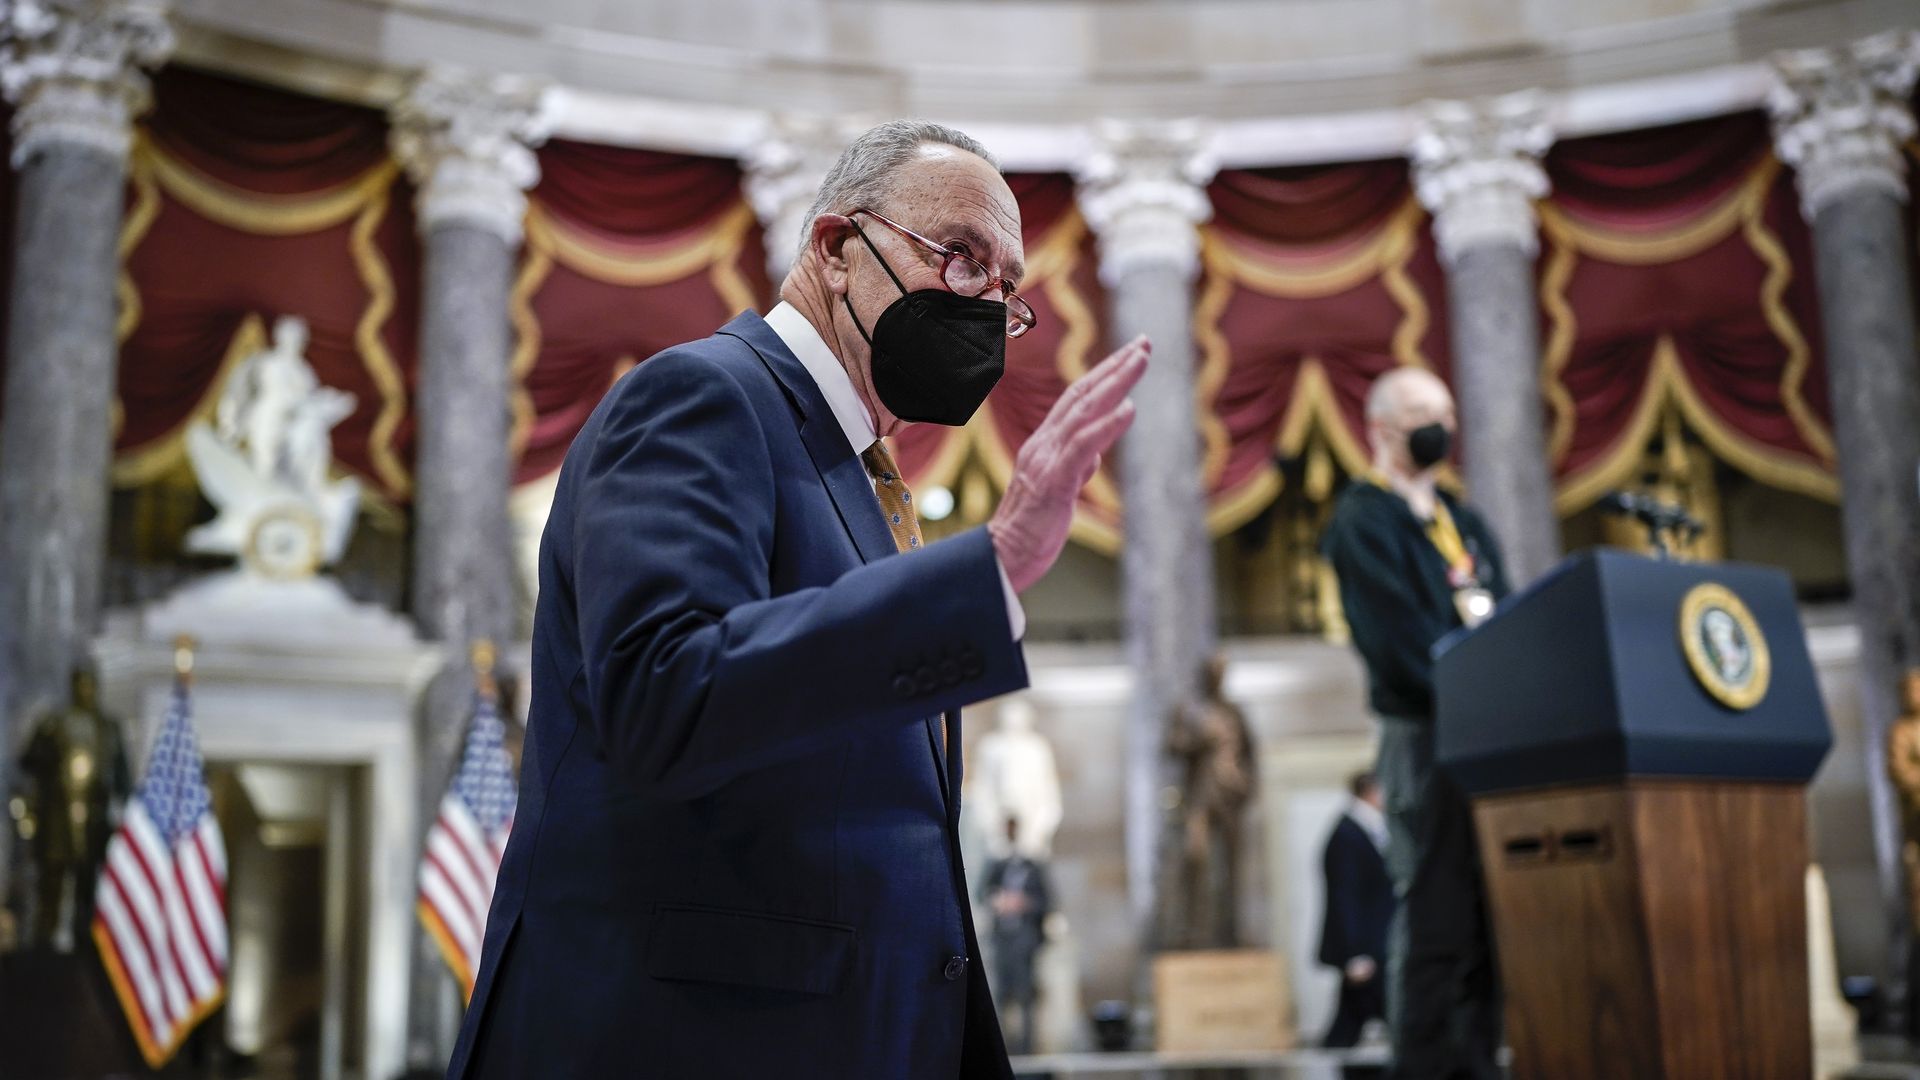 Senate Majority Leader Chuck Schumer, arrives for a ceremony on the first anniversary of the deadly insurrection at the U.S. Capitol in Washington, D.C., U.S., on Thursday, Jan. 6, 2022